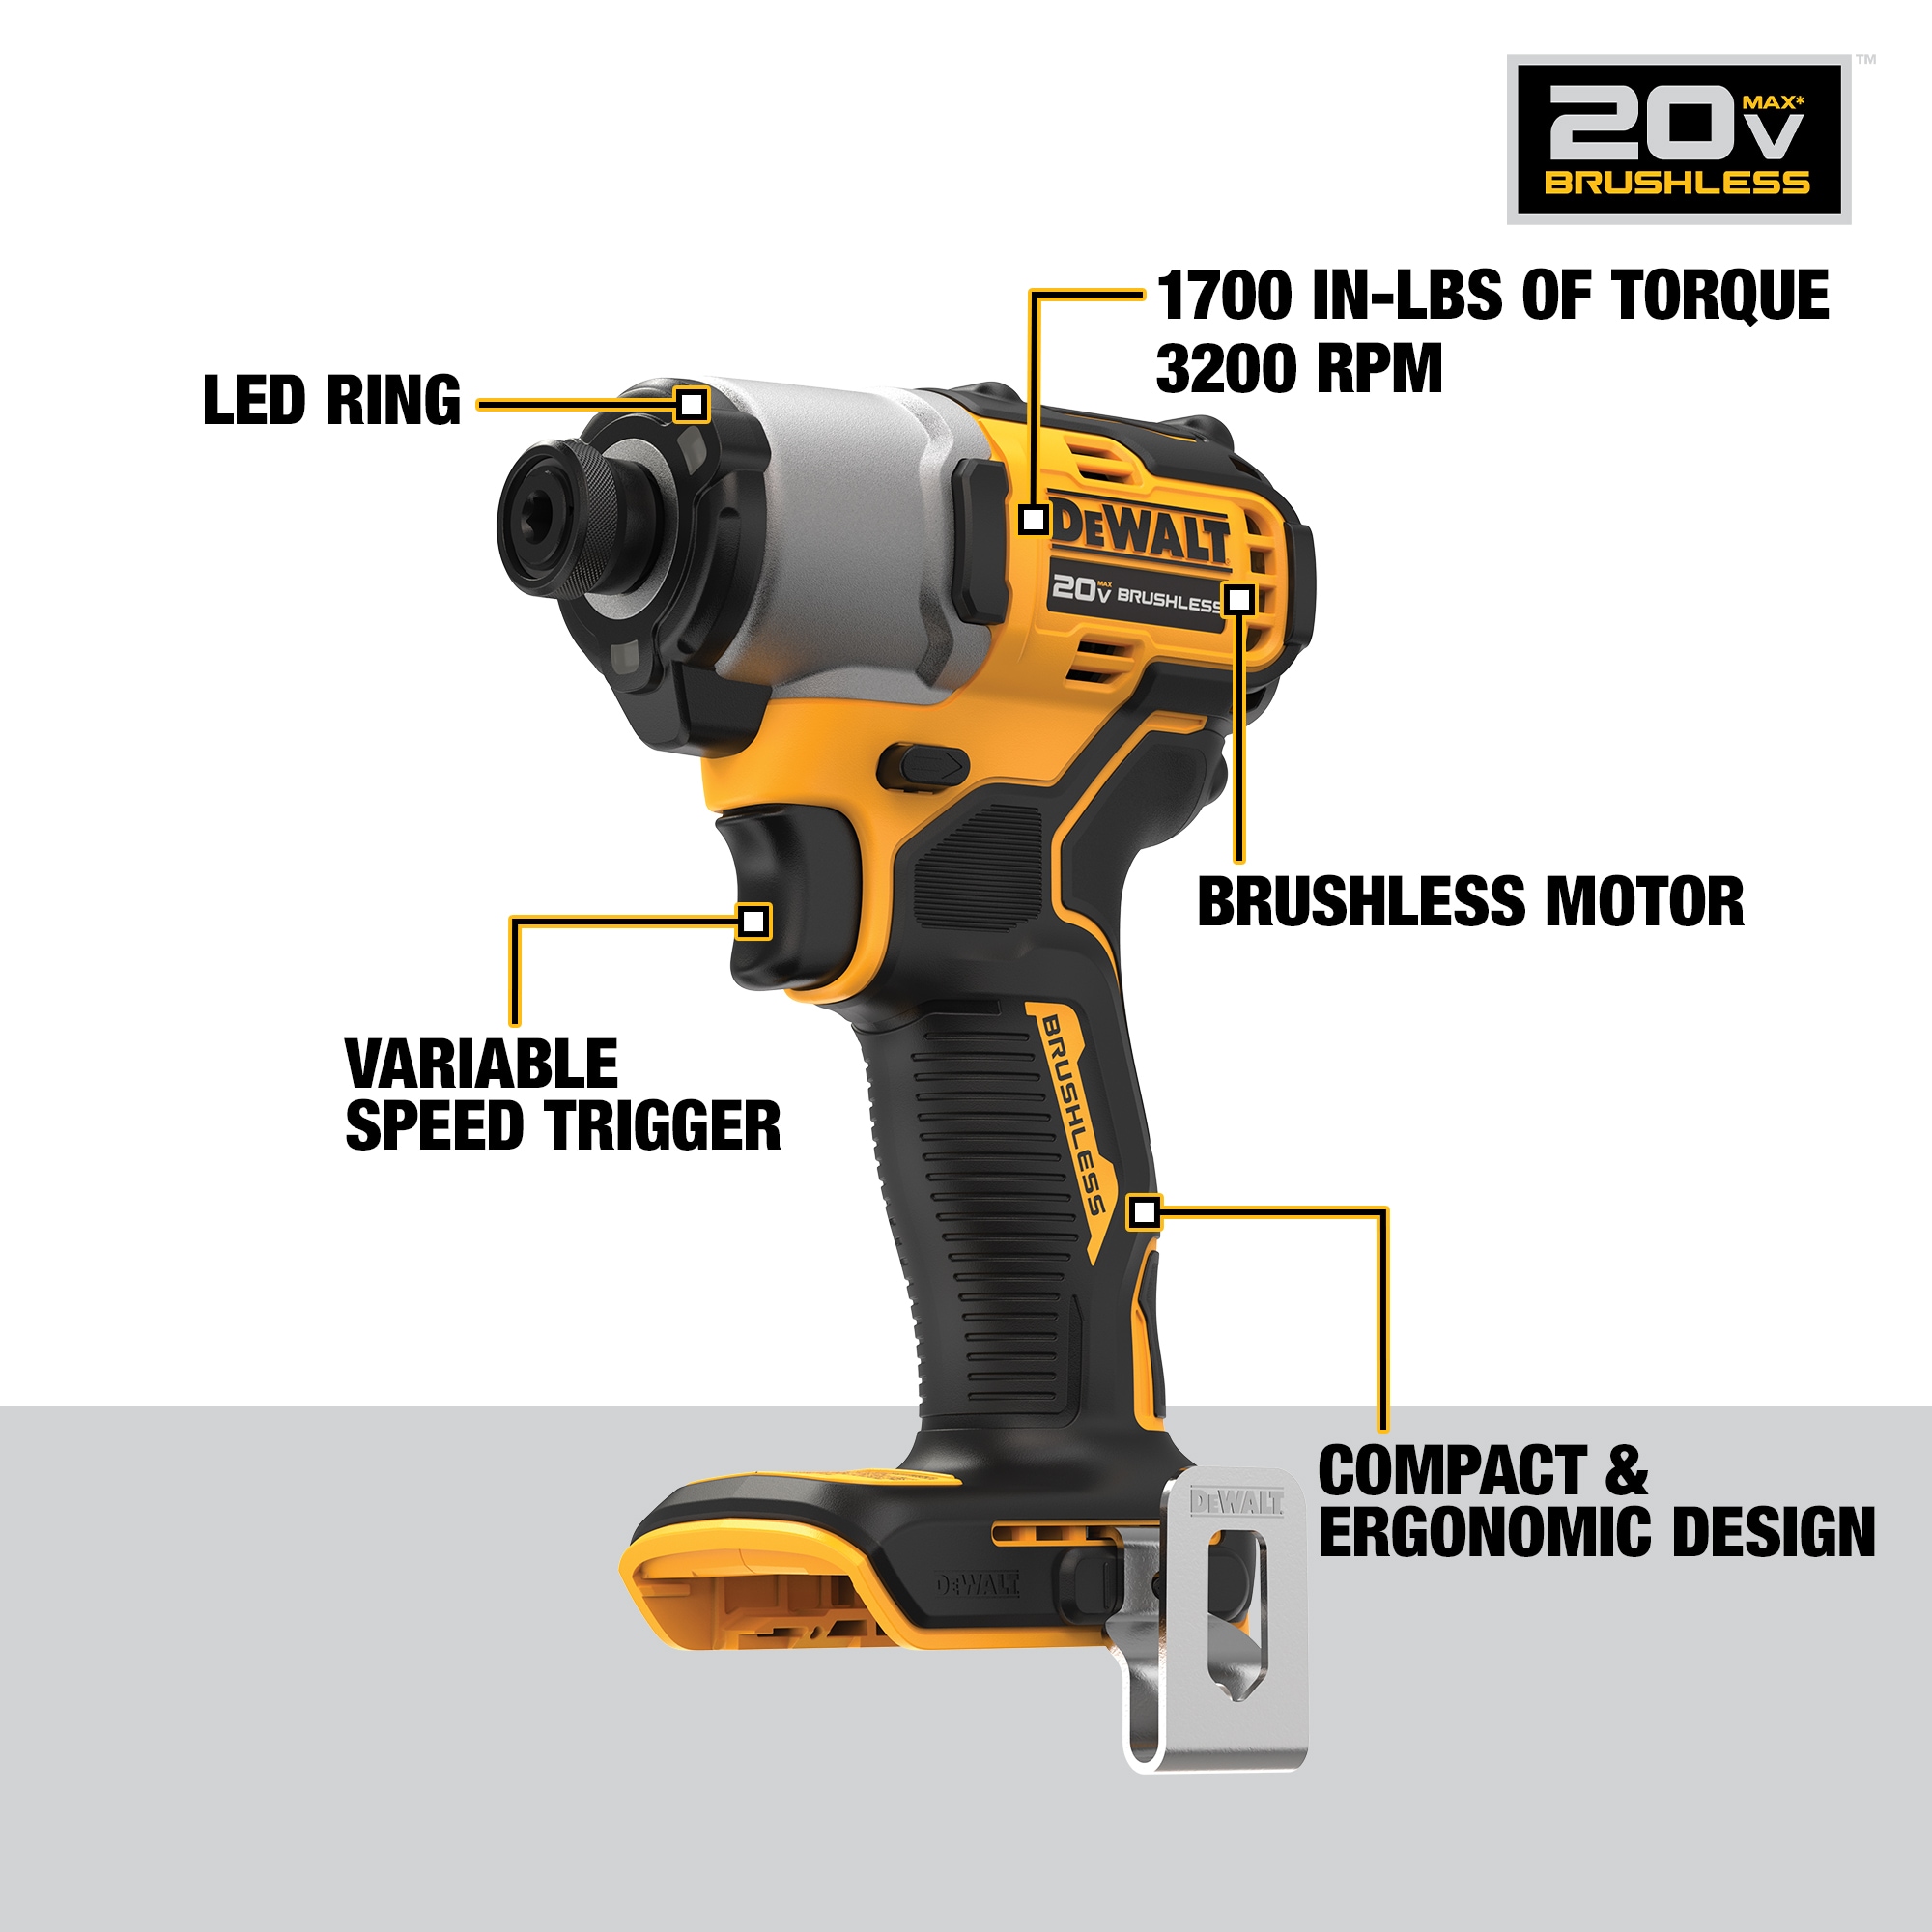 DEWALT 20V MAX XR 2-Tool Brushless Power Tool Combo Kit with Soft Case  (2-Batteries and Charger Included)